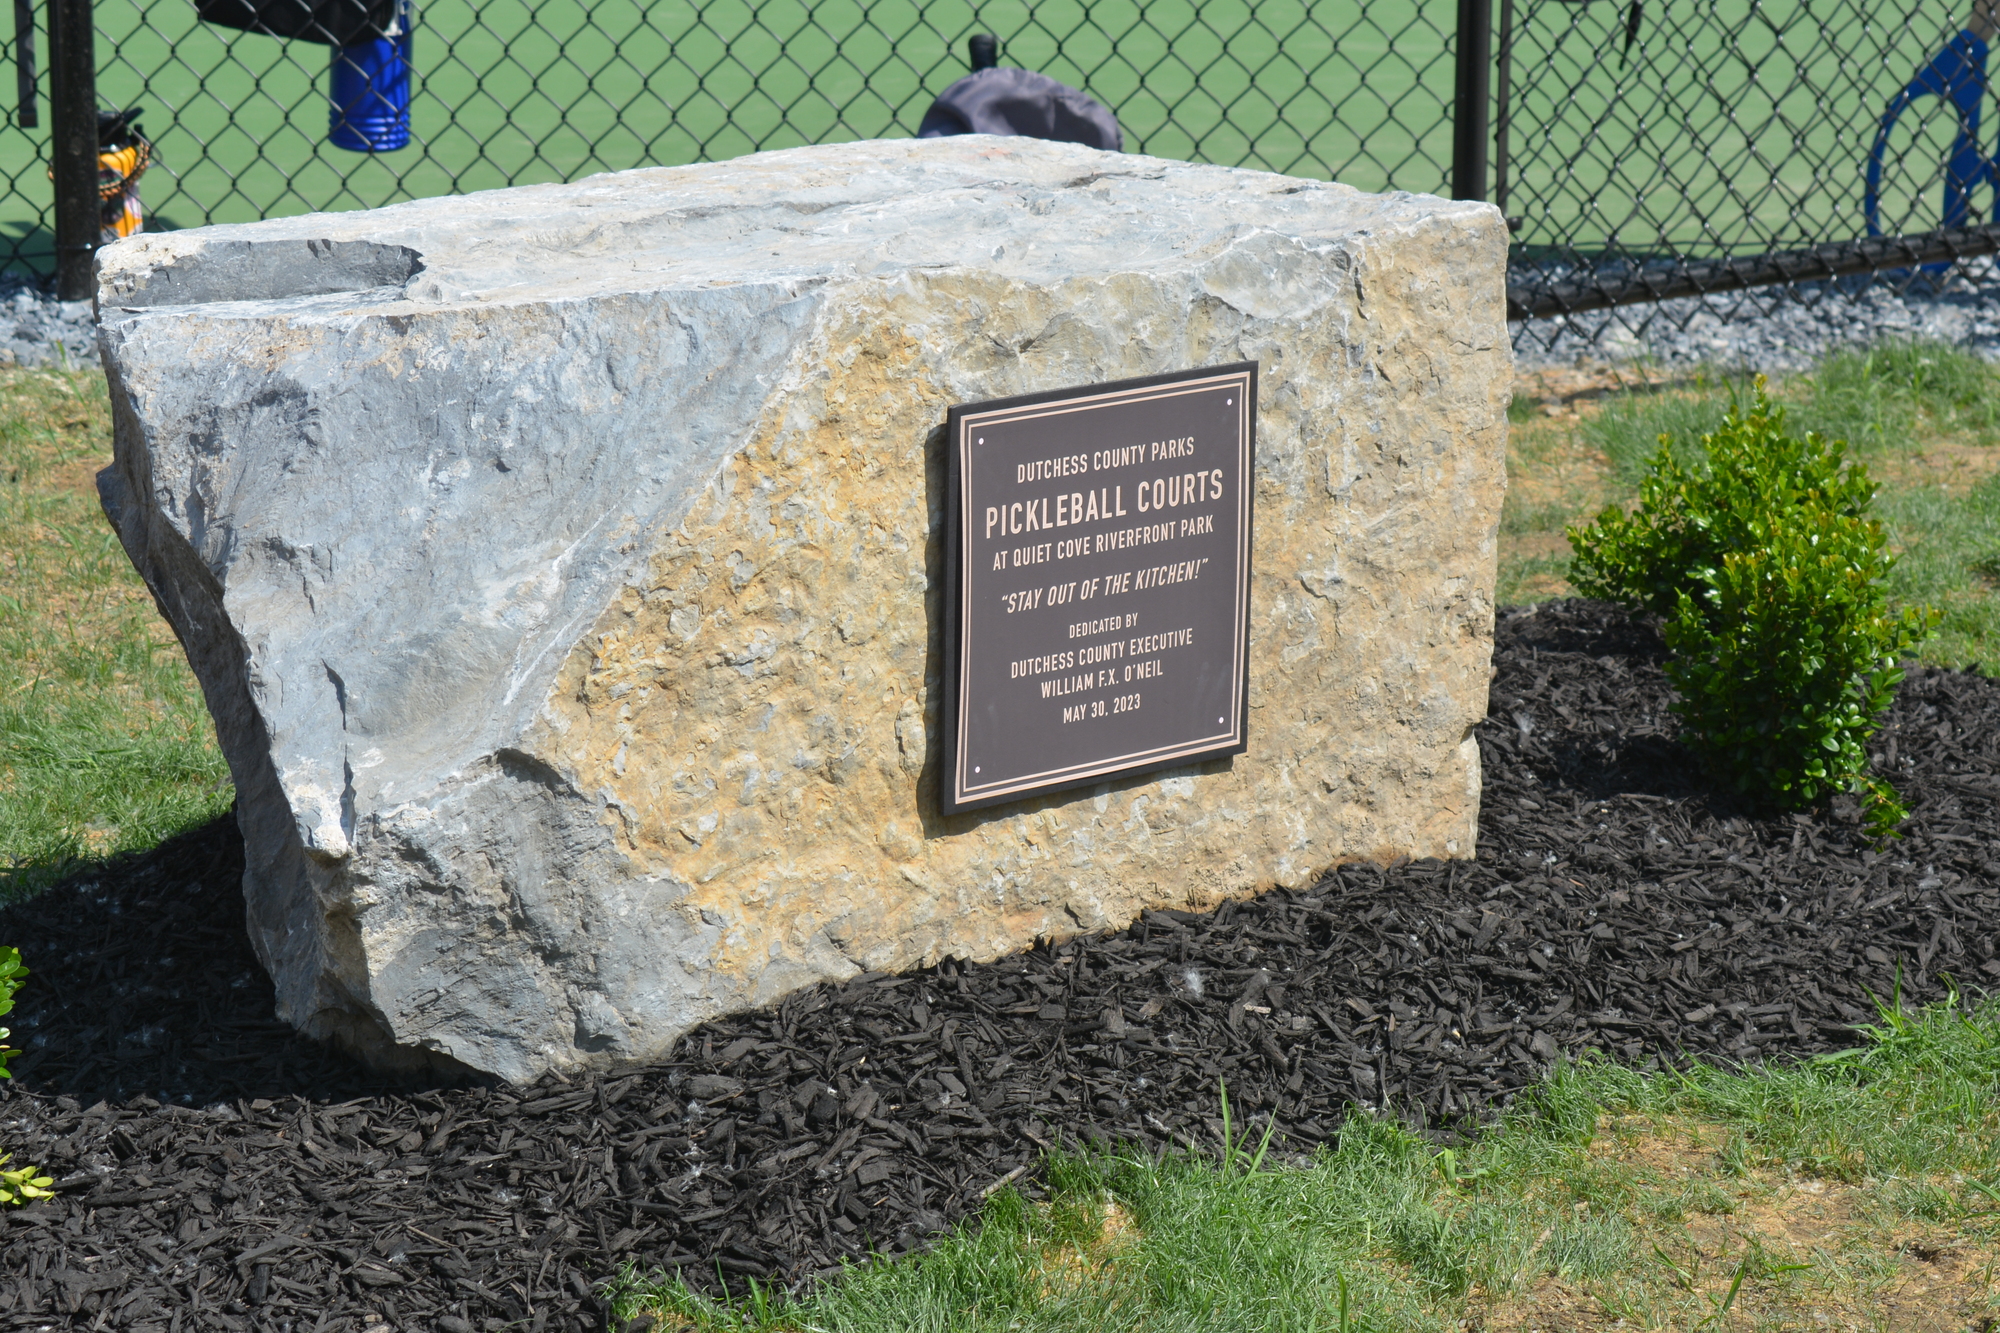 Dedication plaque at pickleball courts